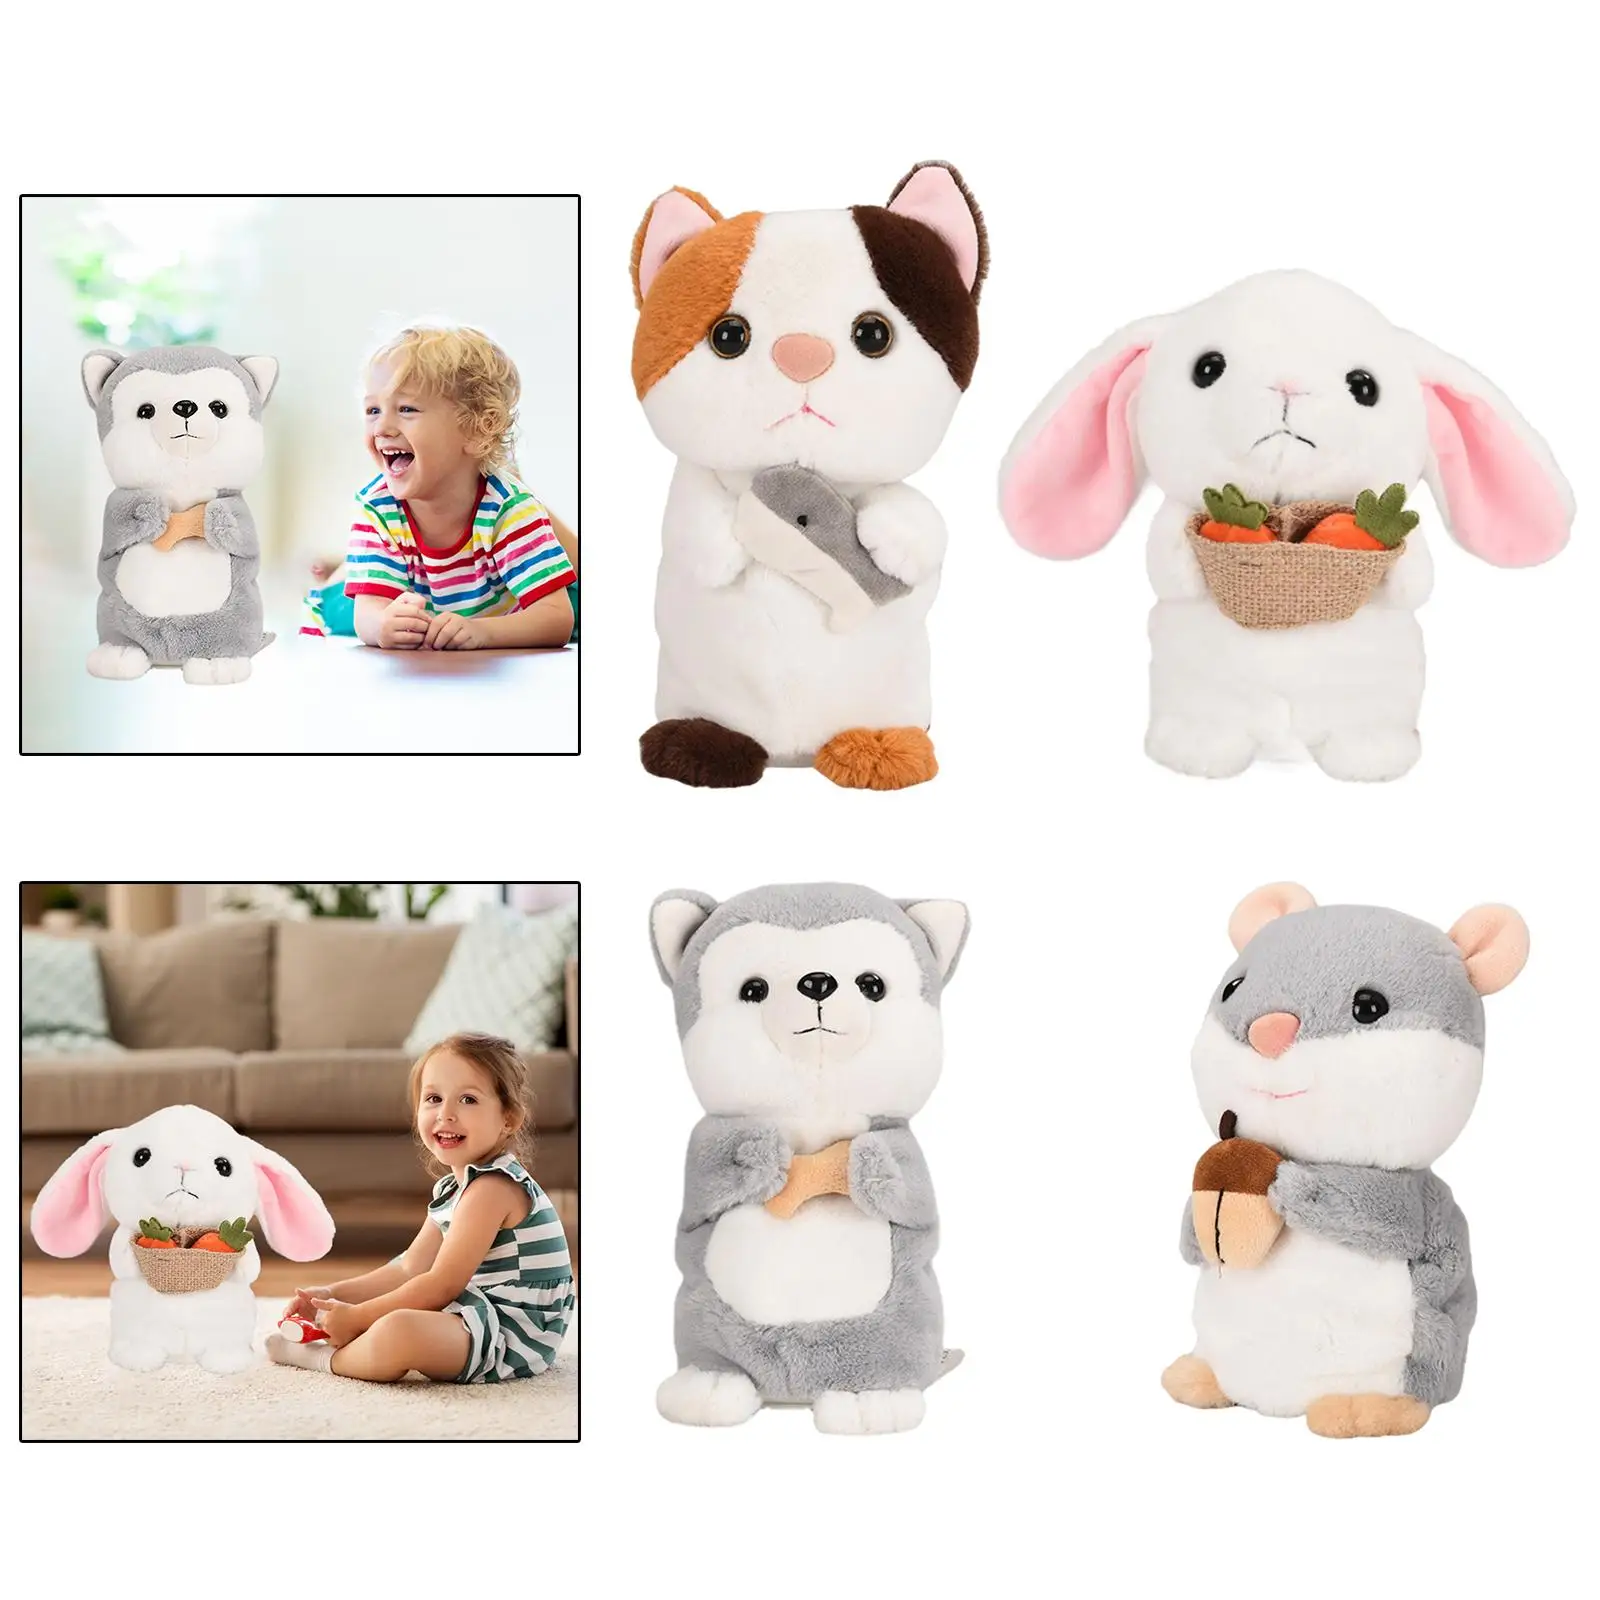 Cute Electric Plush Doll Voice Copy Repeat Birthday Gifts Battery Operated for Girls Boys